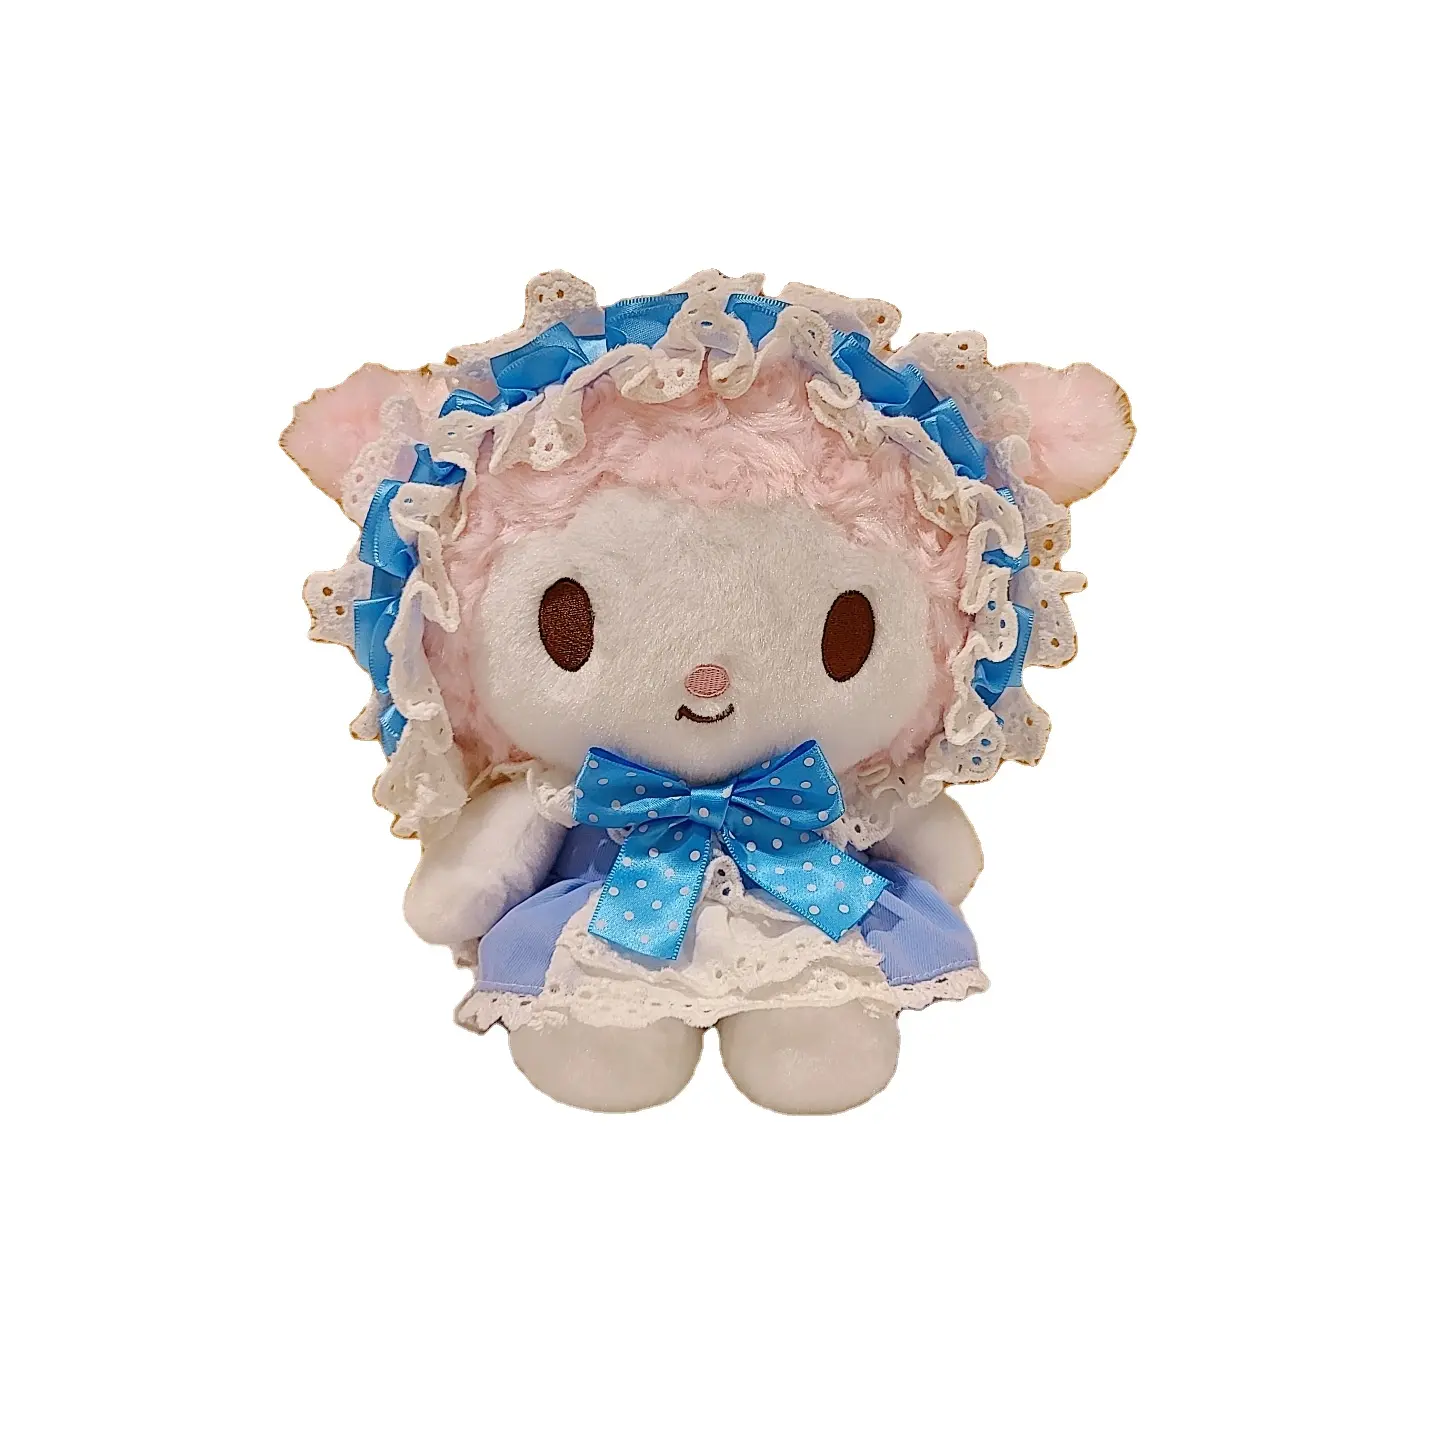 New Lolita Little Sheep Cute Japanese Edition Plush Toy Doll Children's Gift Lace Princess Dress melody